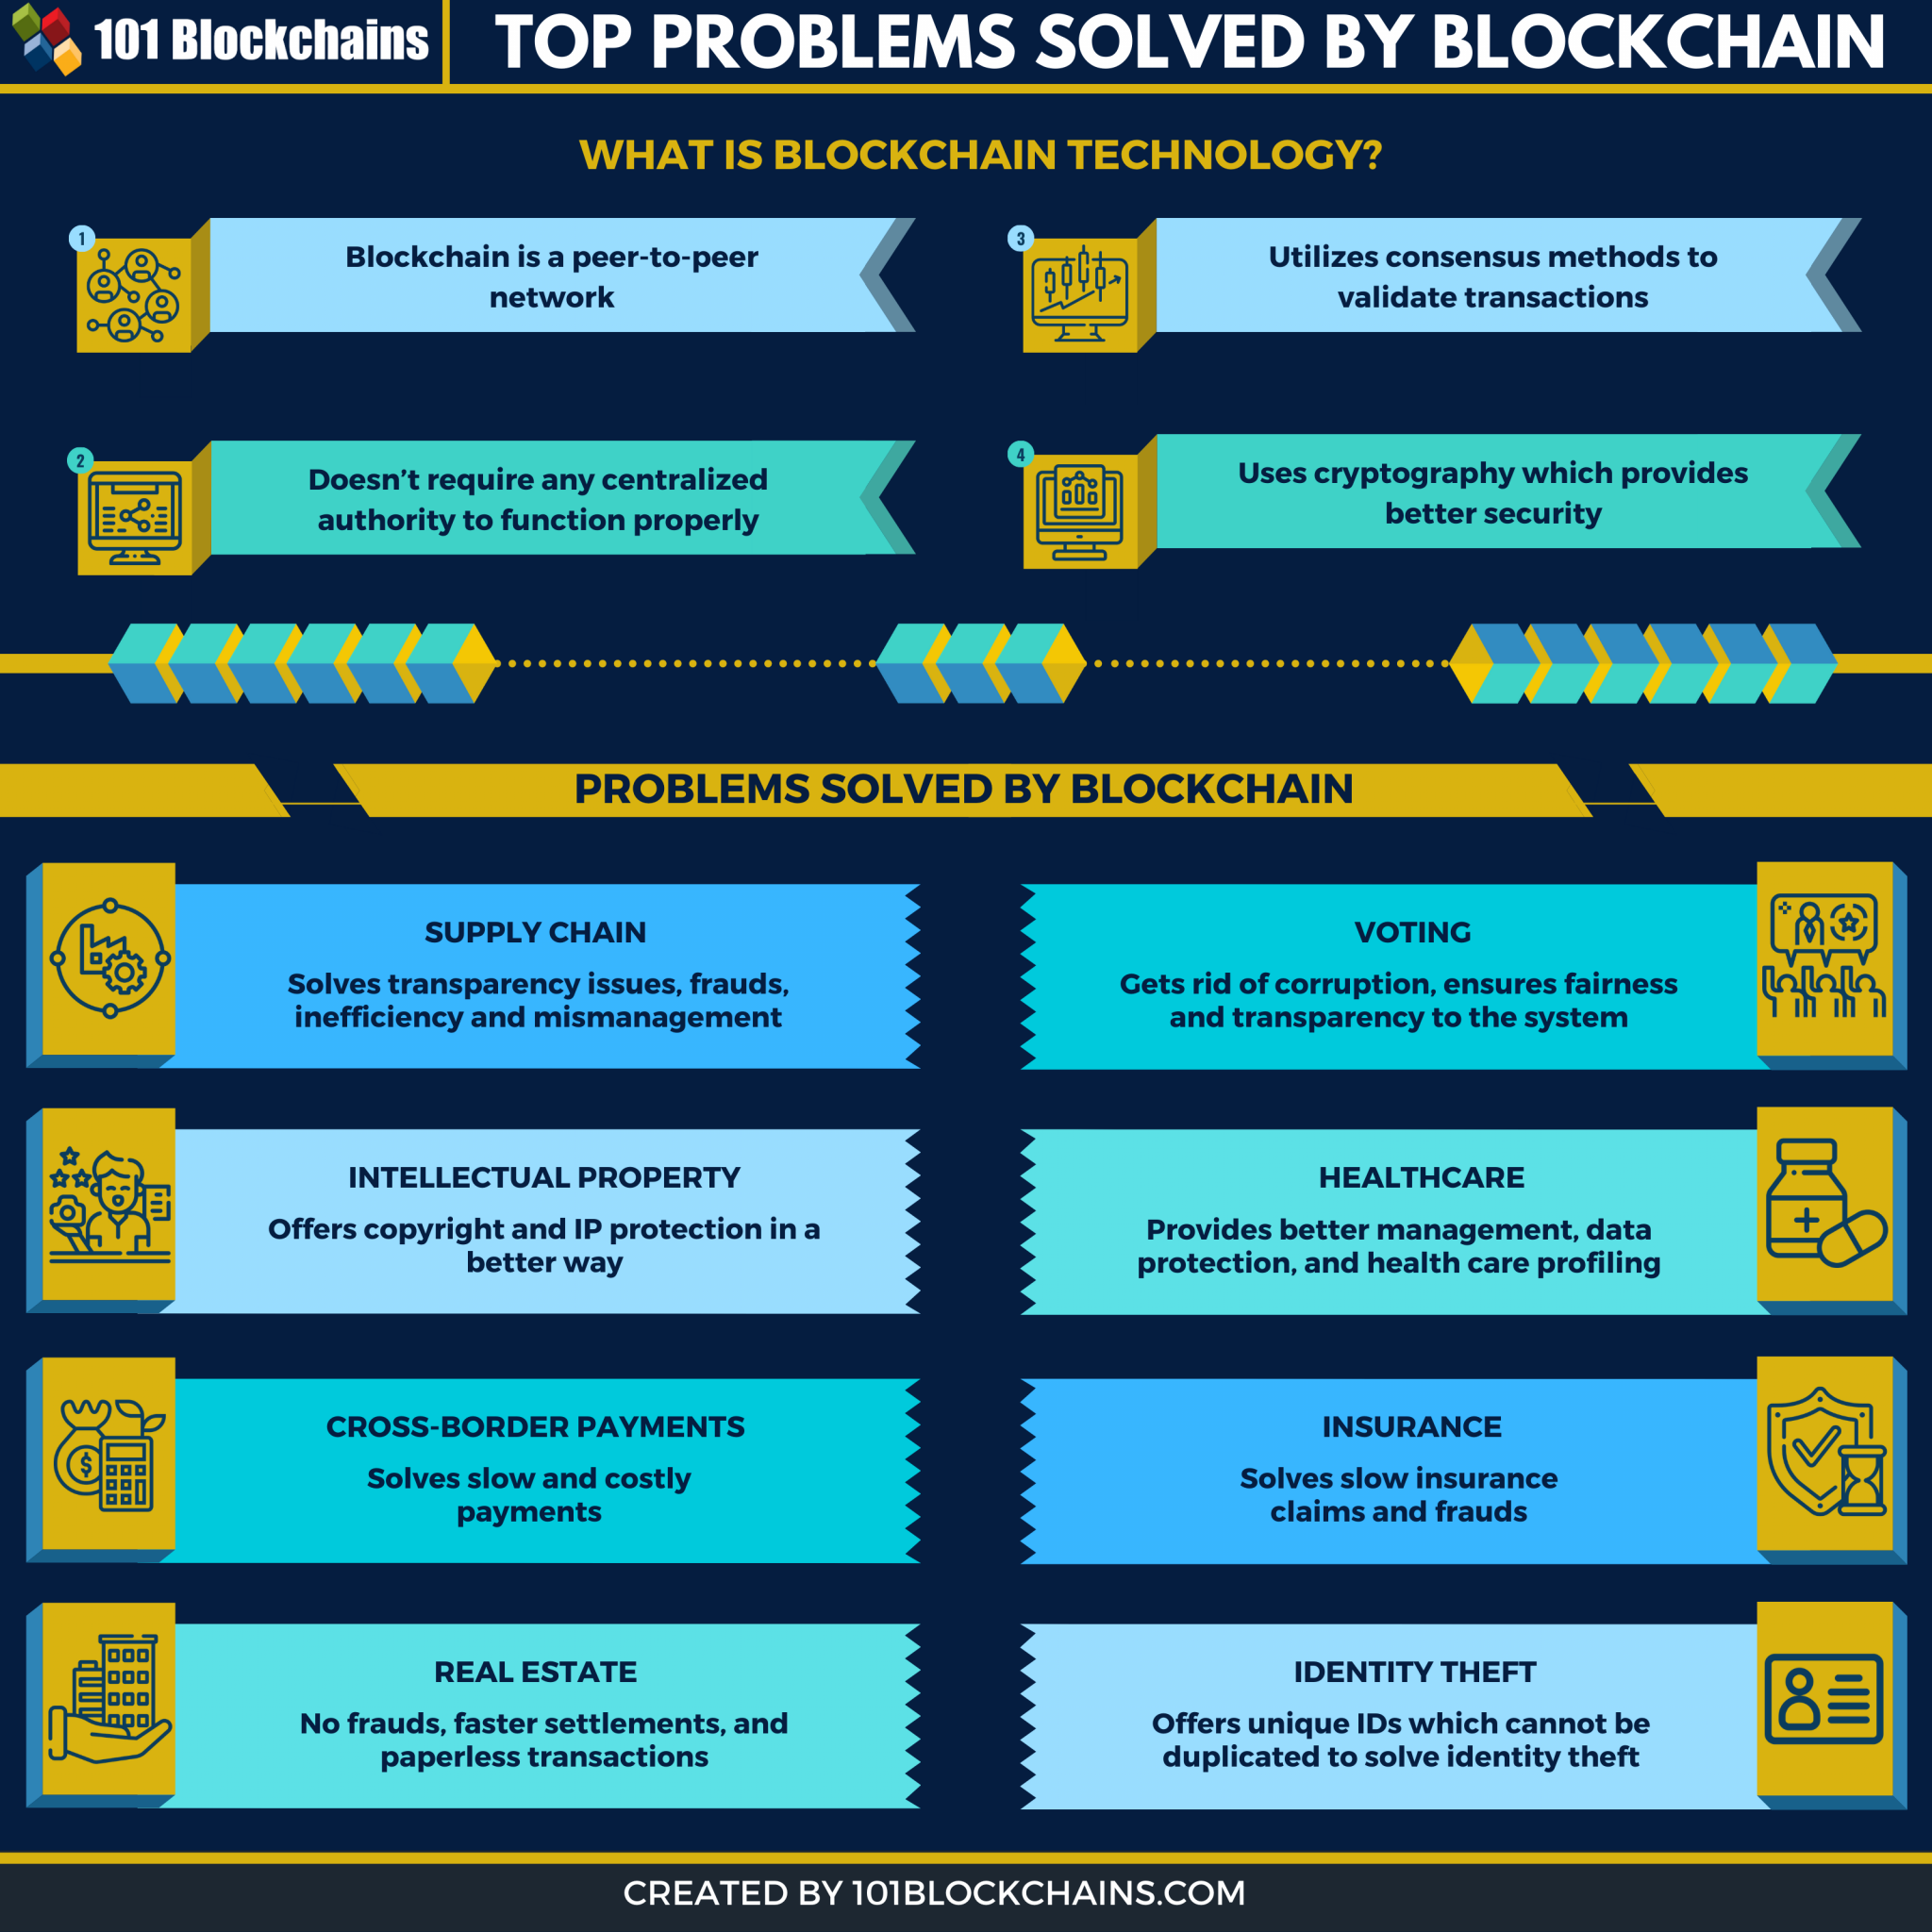 what problems can blockchain solve